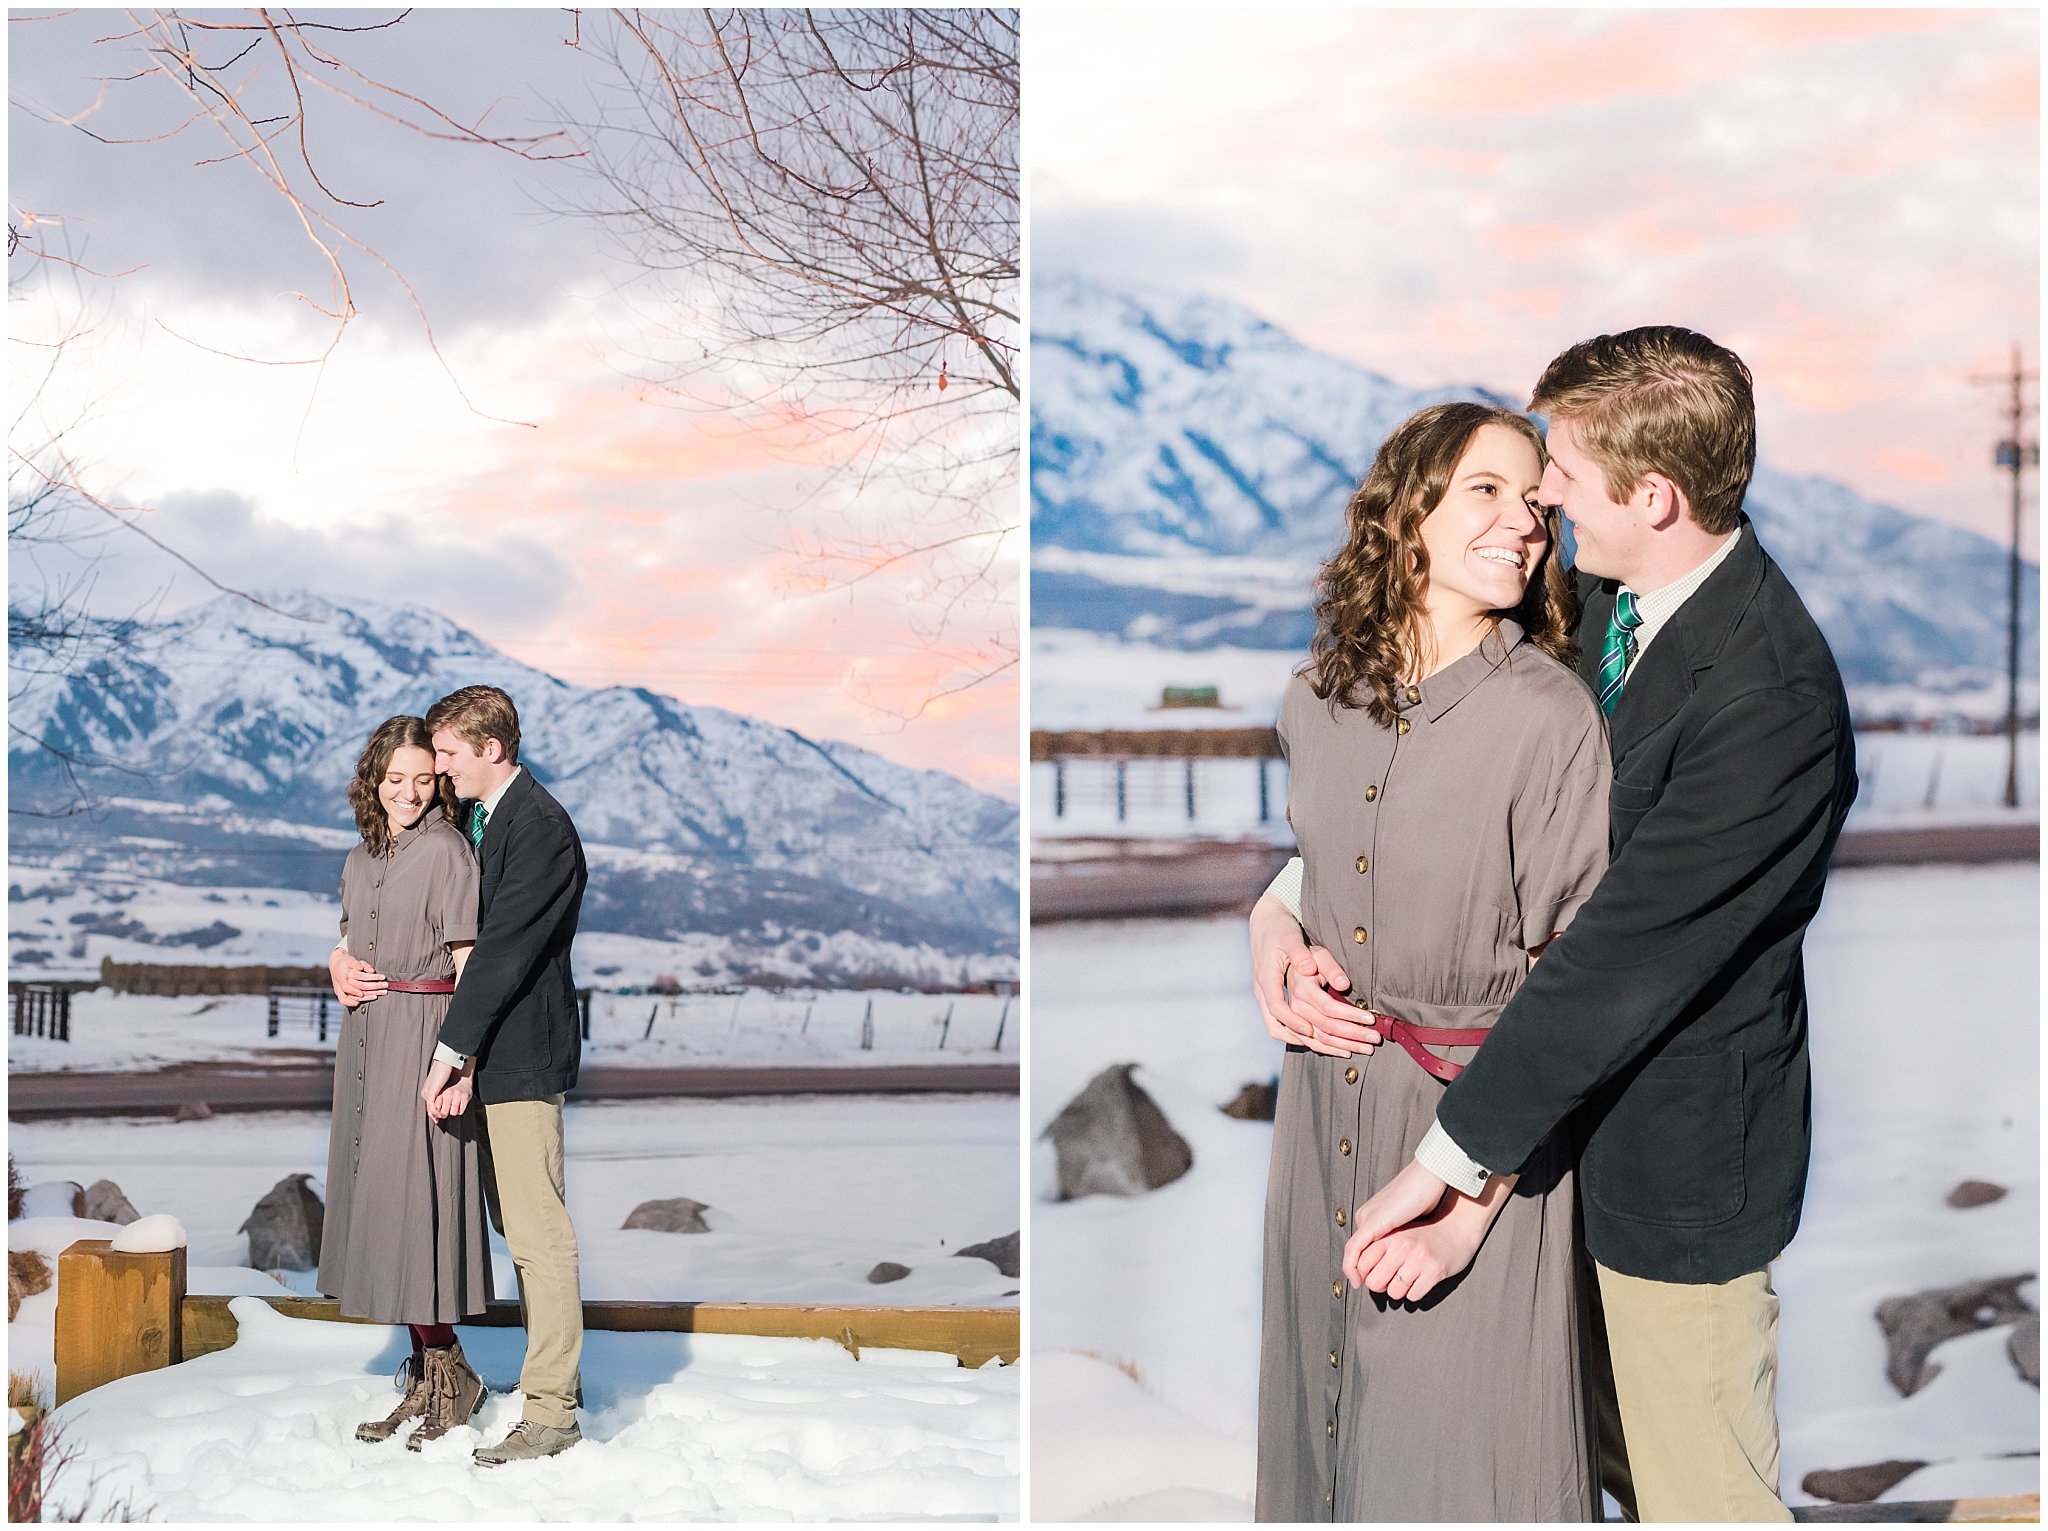 Snowy sunset engagement session with couple dressed up in grey dress and navy sport coat in the mountains | Snowbasin Winter Engagement Session